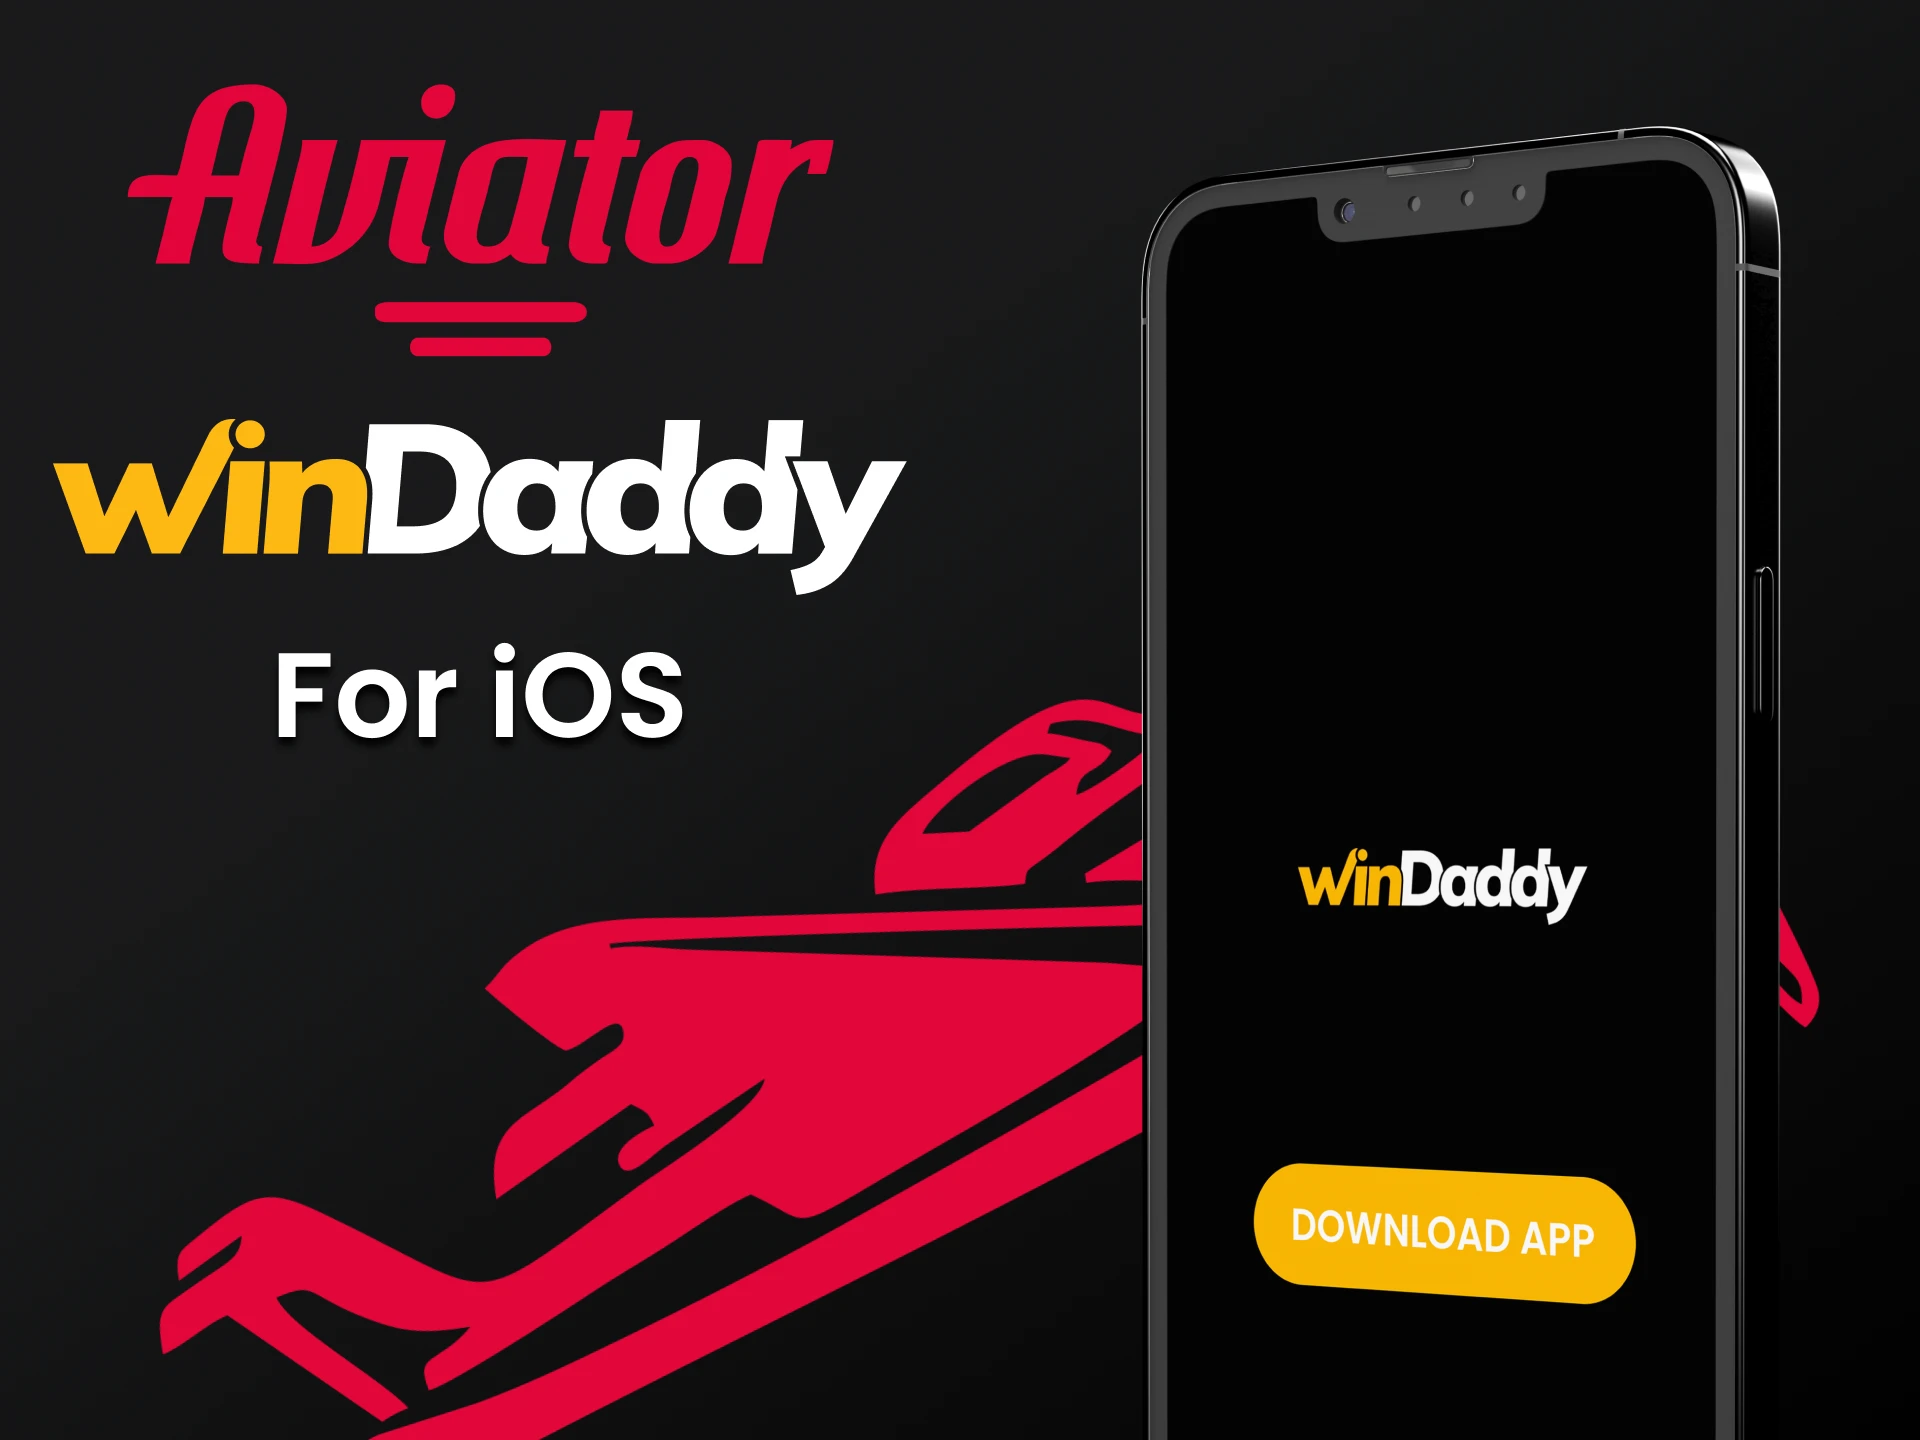 Download the WinDaddy app for iOS to play Aviator.